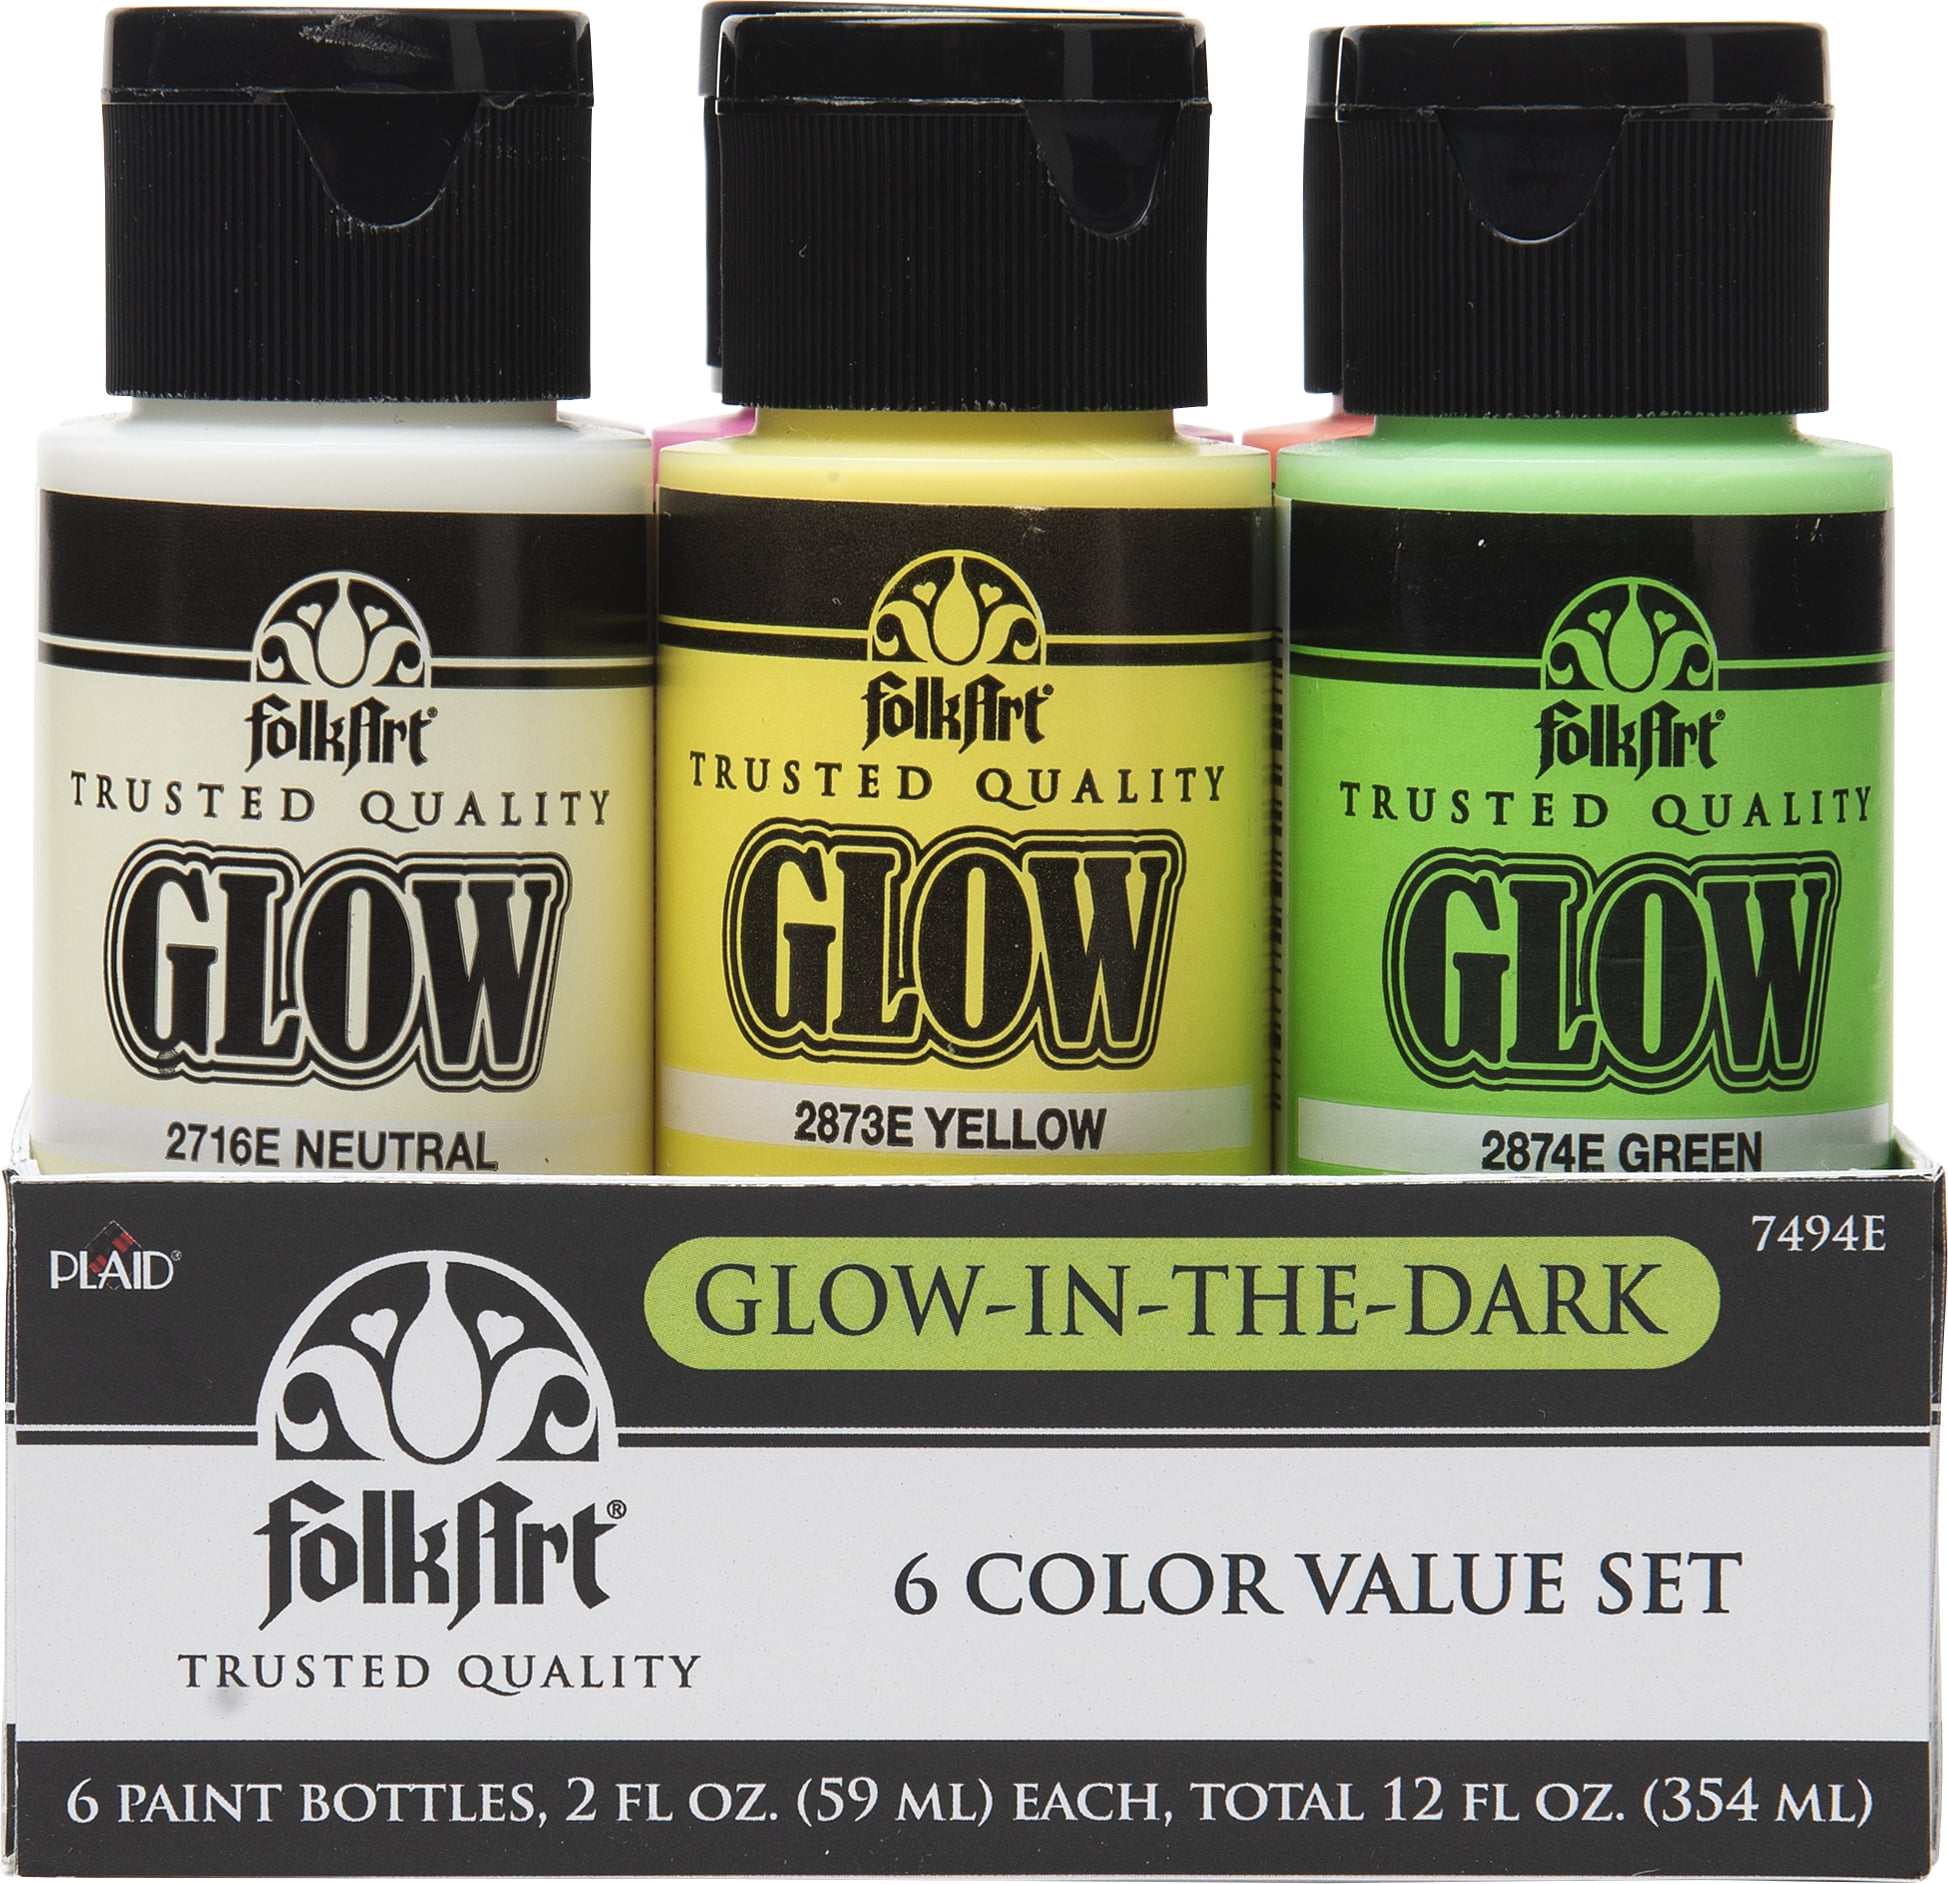  The Army Painter - Metallic Colours Paint Set - Hobby Acrylic  Paint Set of 10 Metallic Acrylic Paint - Includes Tainted Gold Acrylic  Paint Metallic - Acrylic Hobby Paint Set of